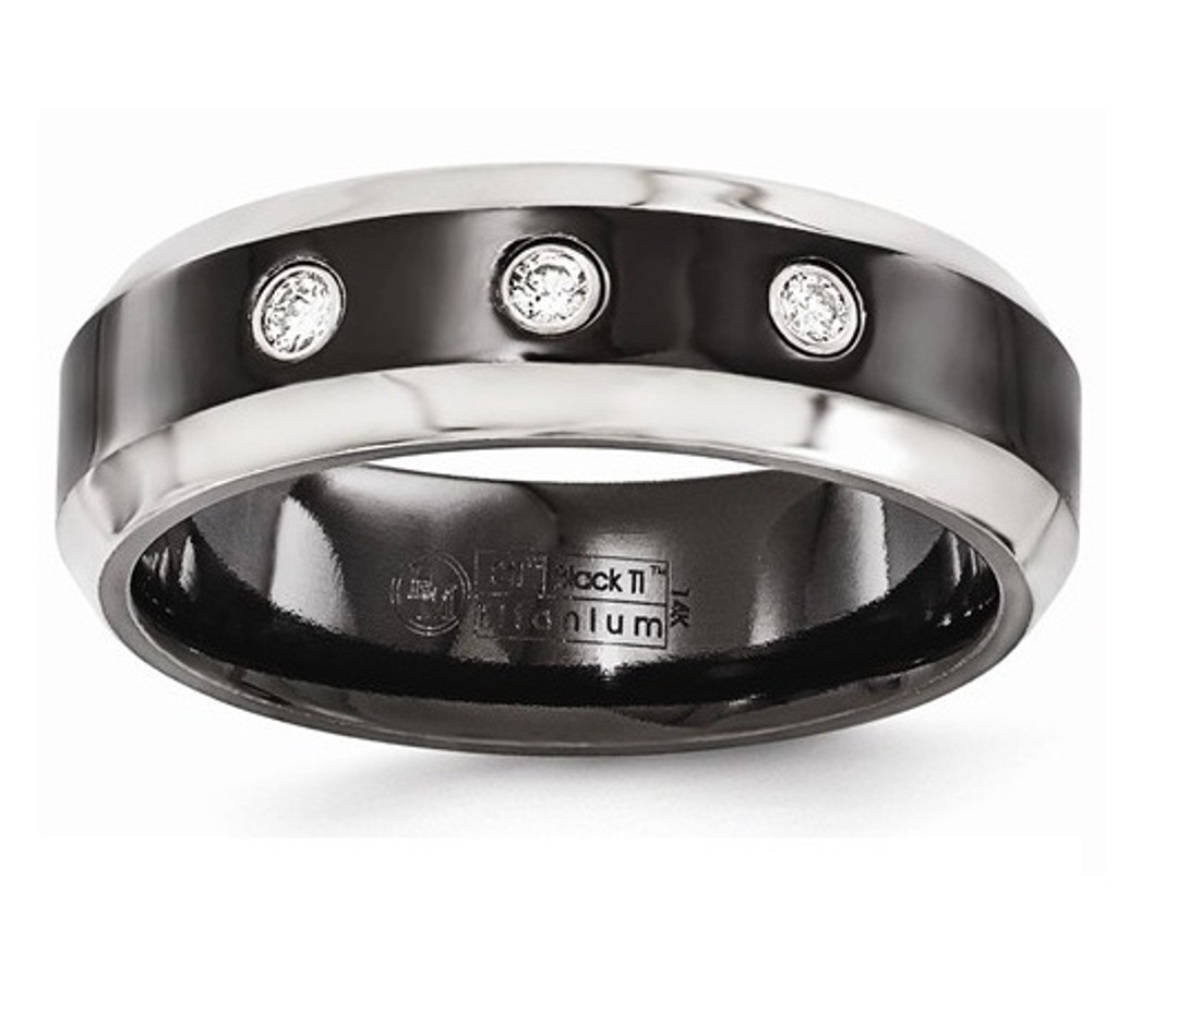  Black Ti Beveled Diamond With Sterling Silver Bezel Band